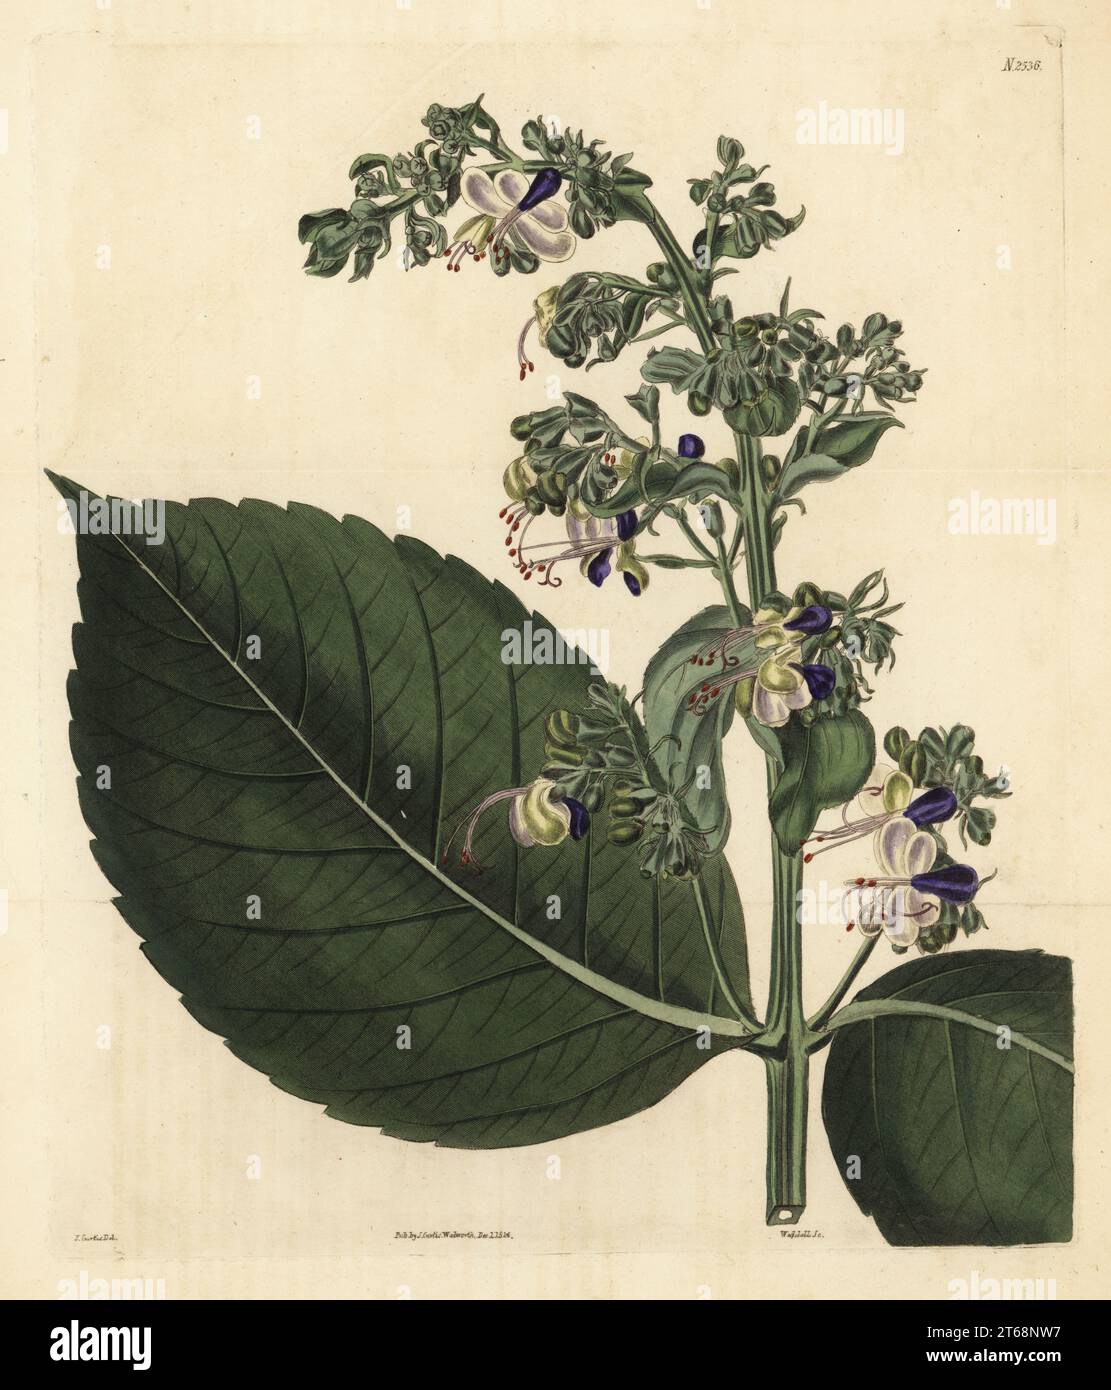 Blue fountain bush, the blue-flowered glory tree or the beetle killer, Rotheca serrata. Broad-leaved clerodendrum, Clerodendrum macrophyllum. Native to Mauritius, introduced by Southwark brewer Robert Barclay from his gardens at Bury Hill. Handcoloured copperplate engraving by Weddell after a botanical illustration by John Curtis from William Curtis's Botanical Magazine, Samuel Curtis, London, 1824. Stock Photo